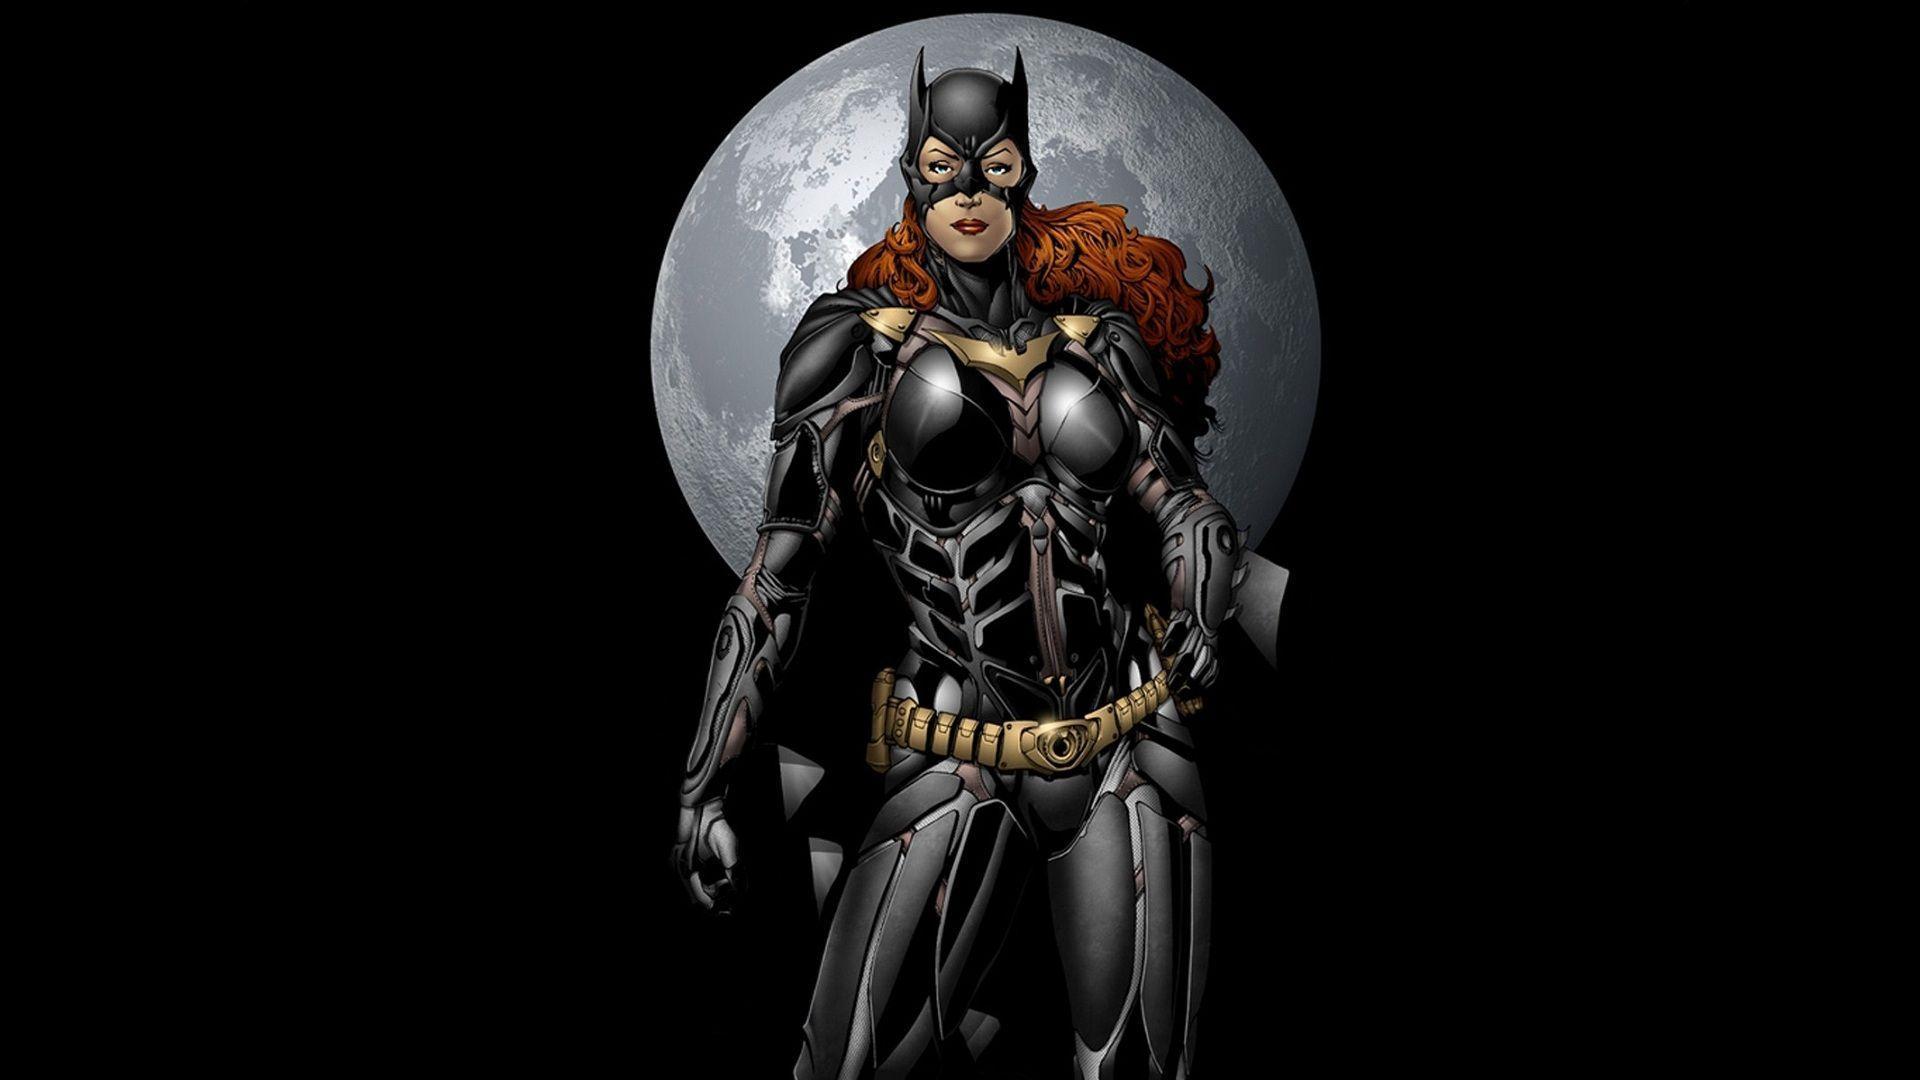 batwoman wallpaper 8 - Image And Wallpaper free to download